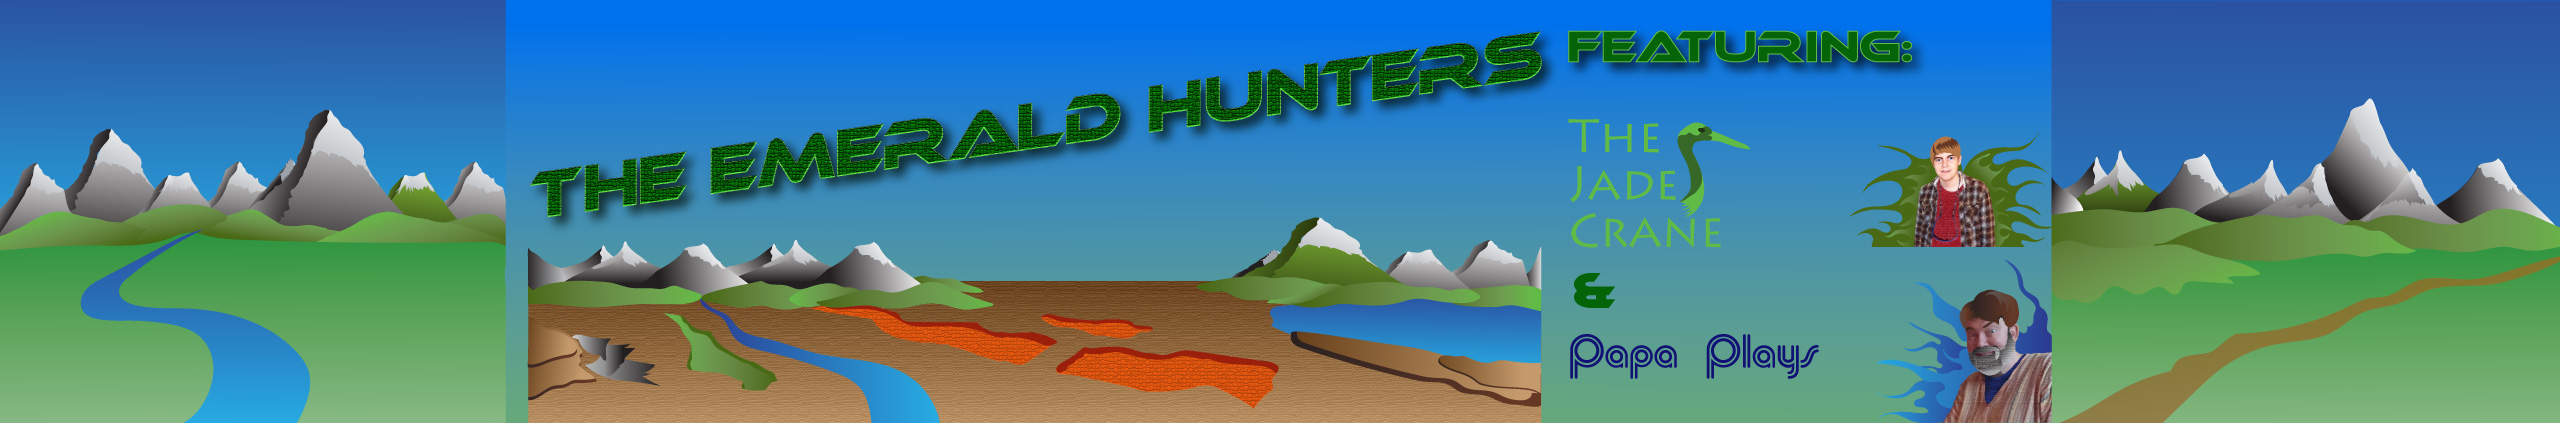 Youtube Videos Banner The Emerald Hunters